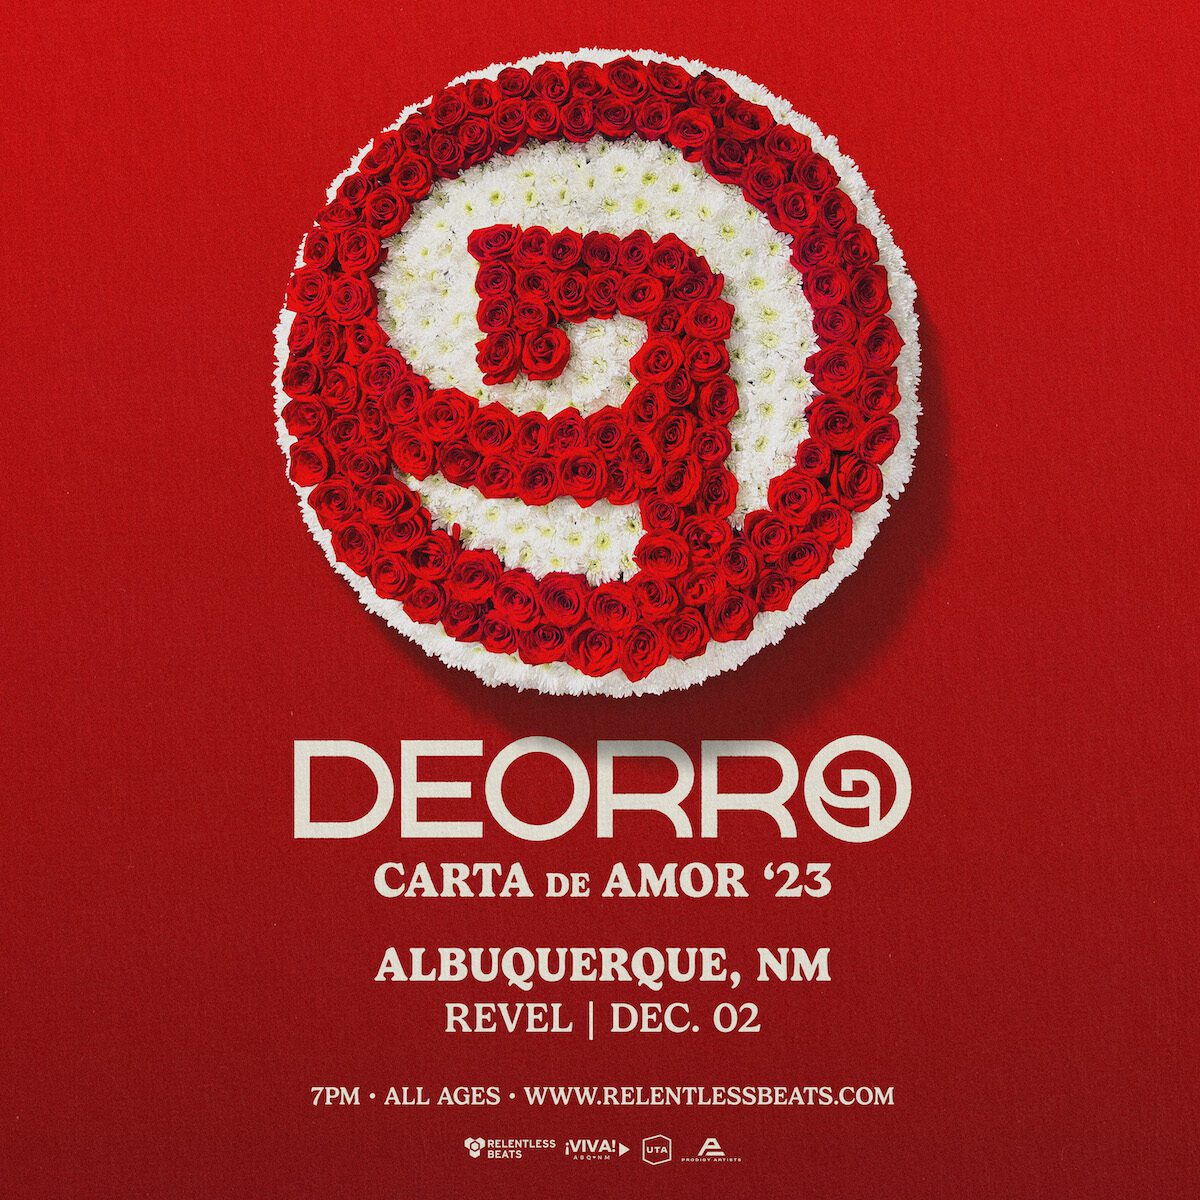 Flyer for Deorro